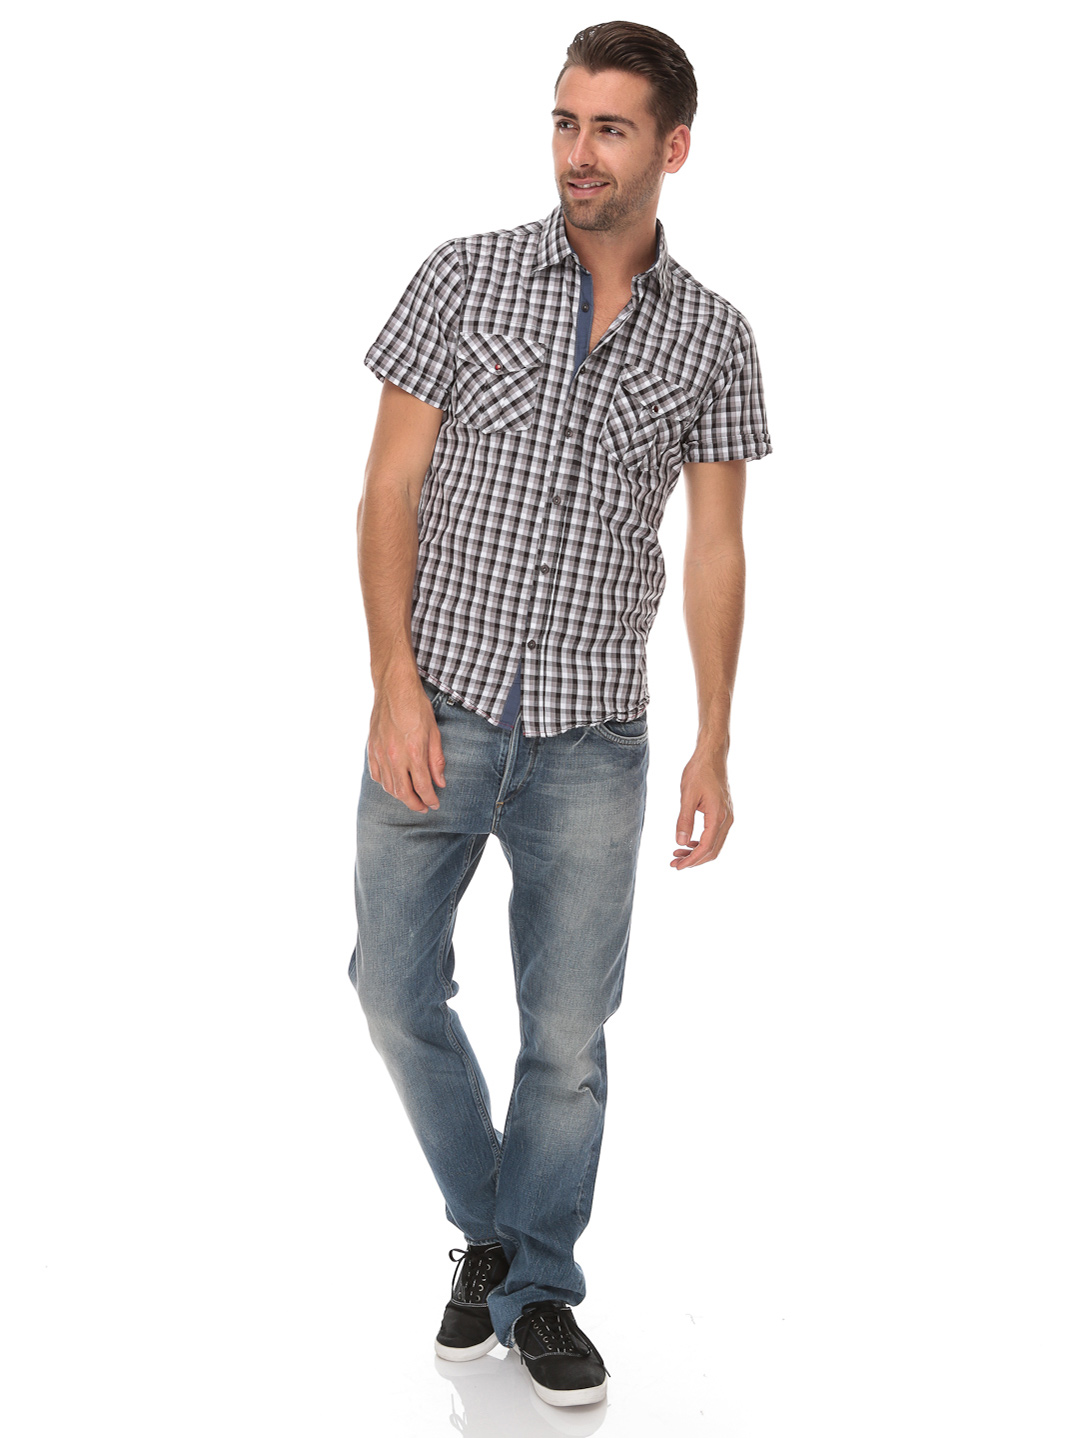 Men's Check Shirts Collection 2013-2014